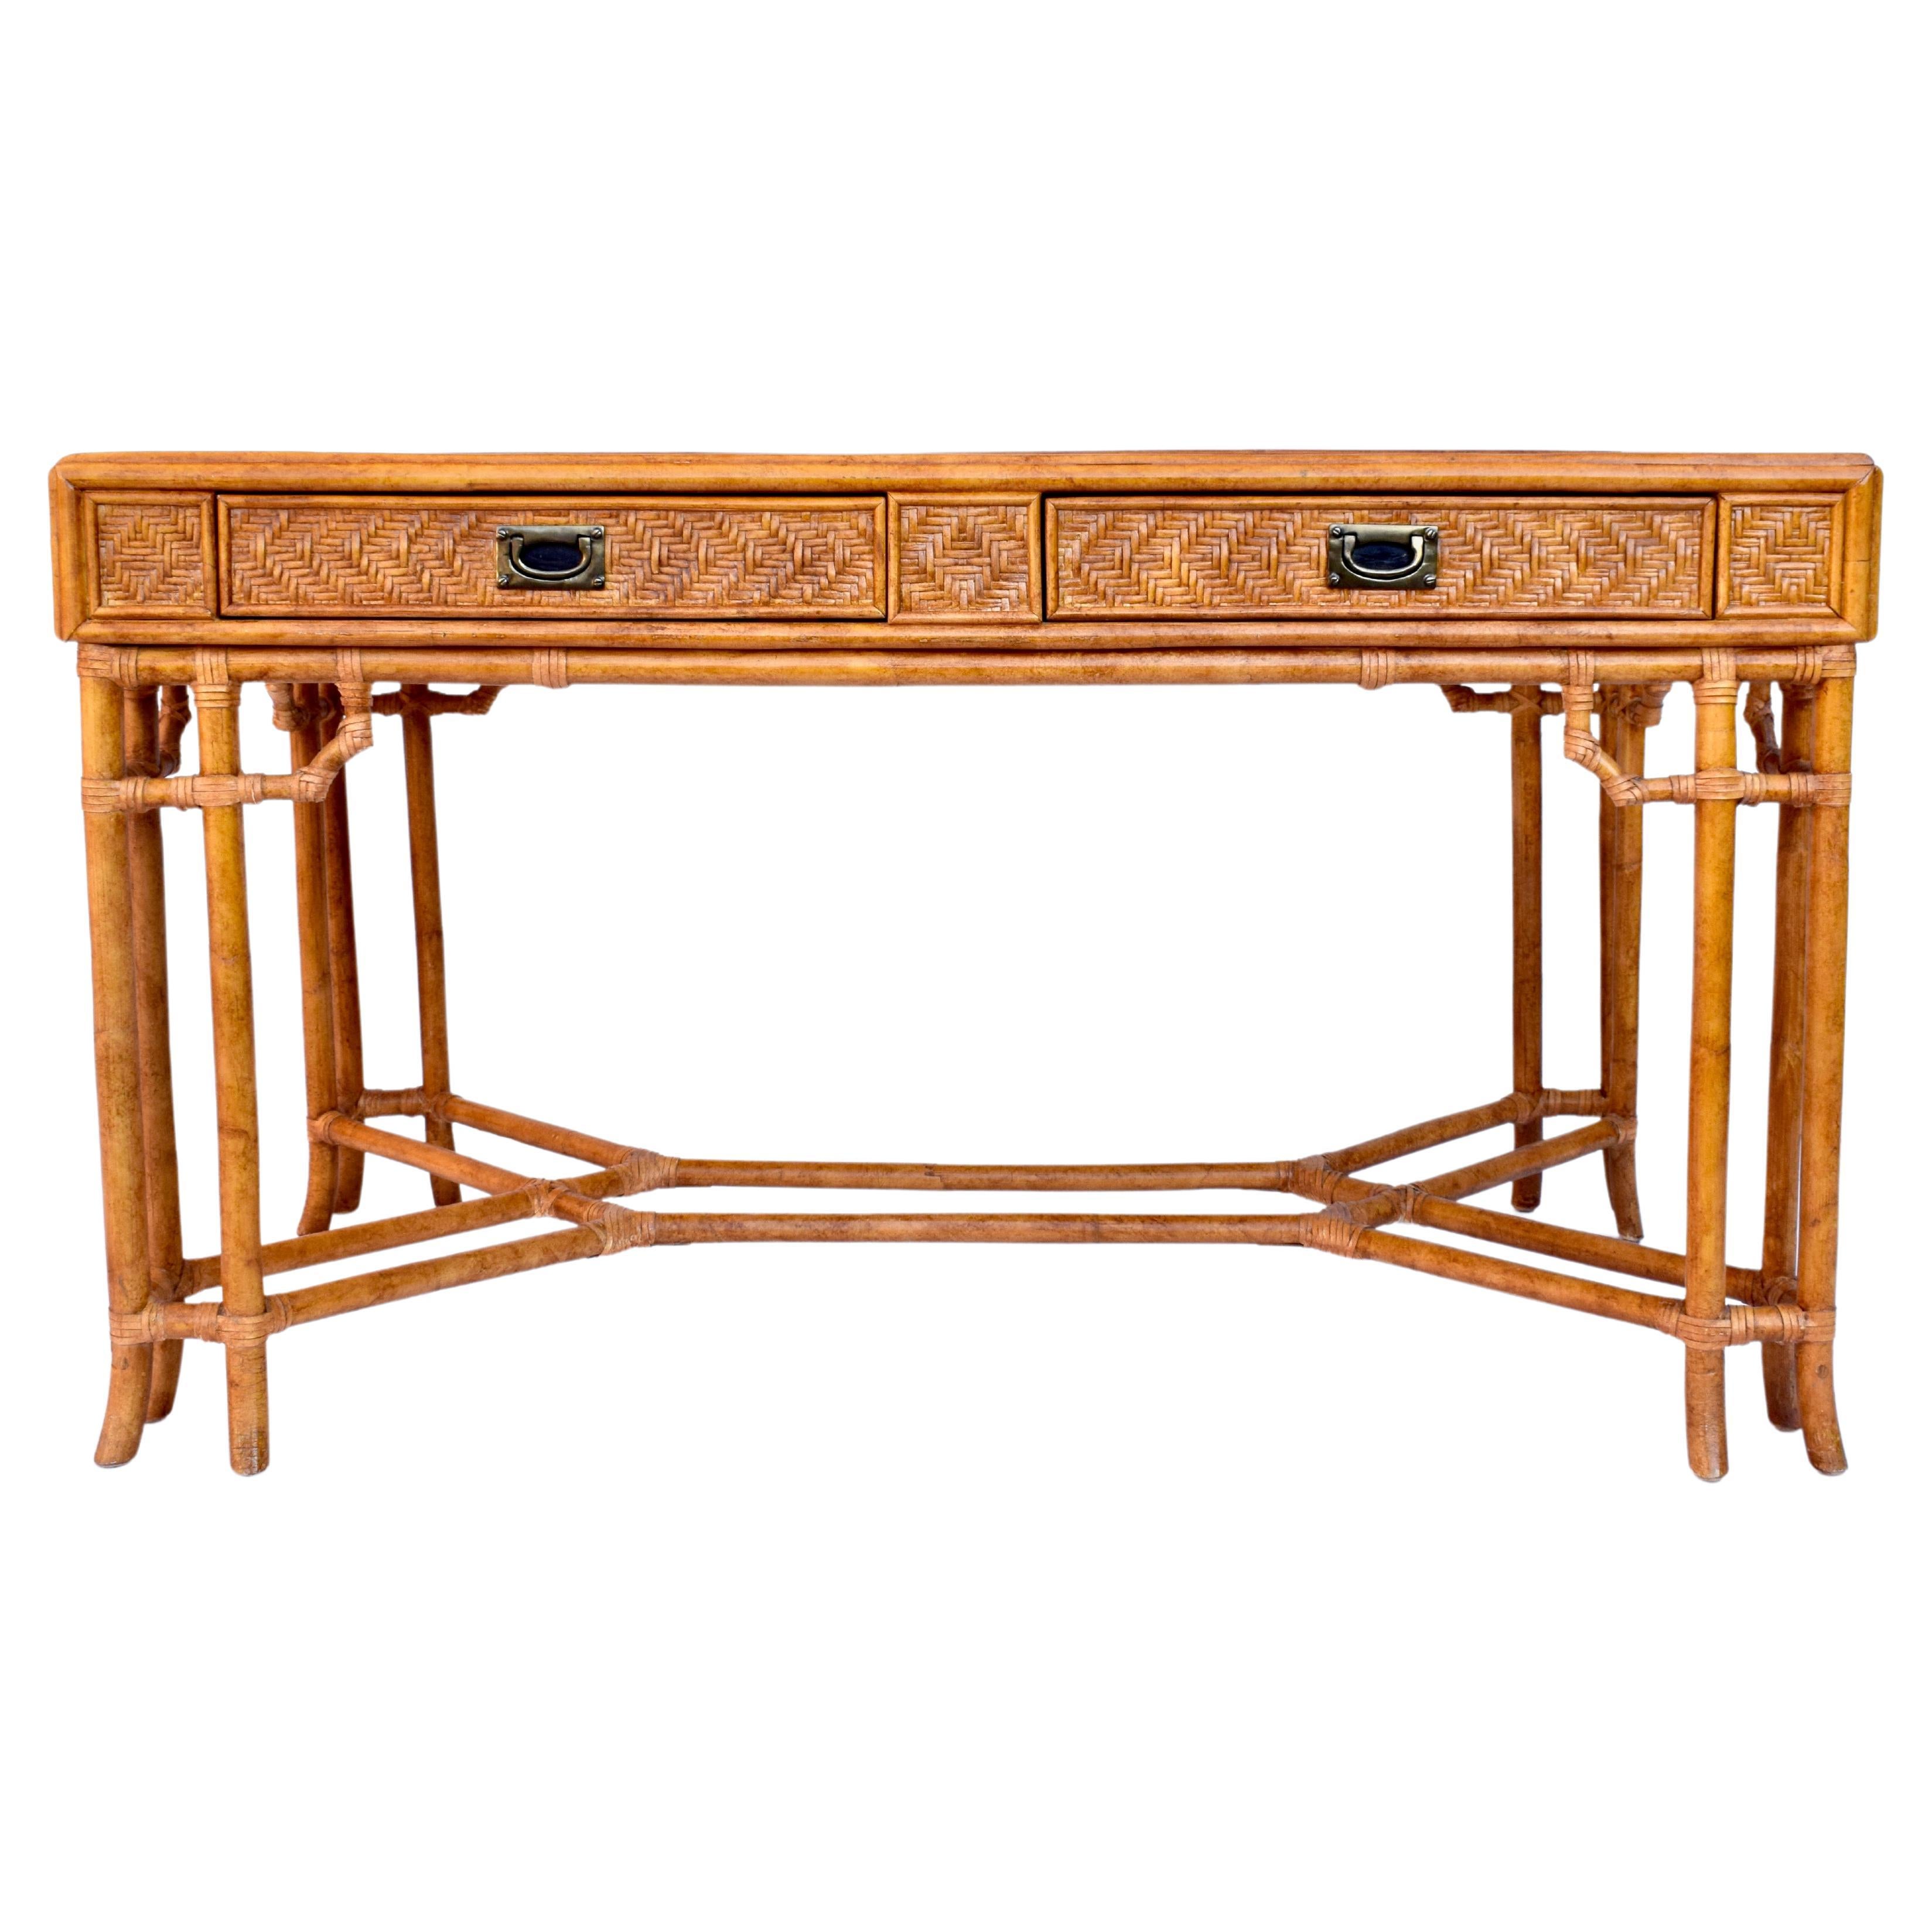 Rattan Midcentury British Colonial Campaign Style Desk